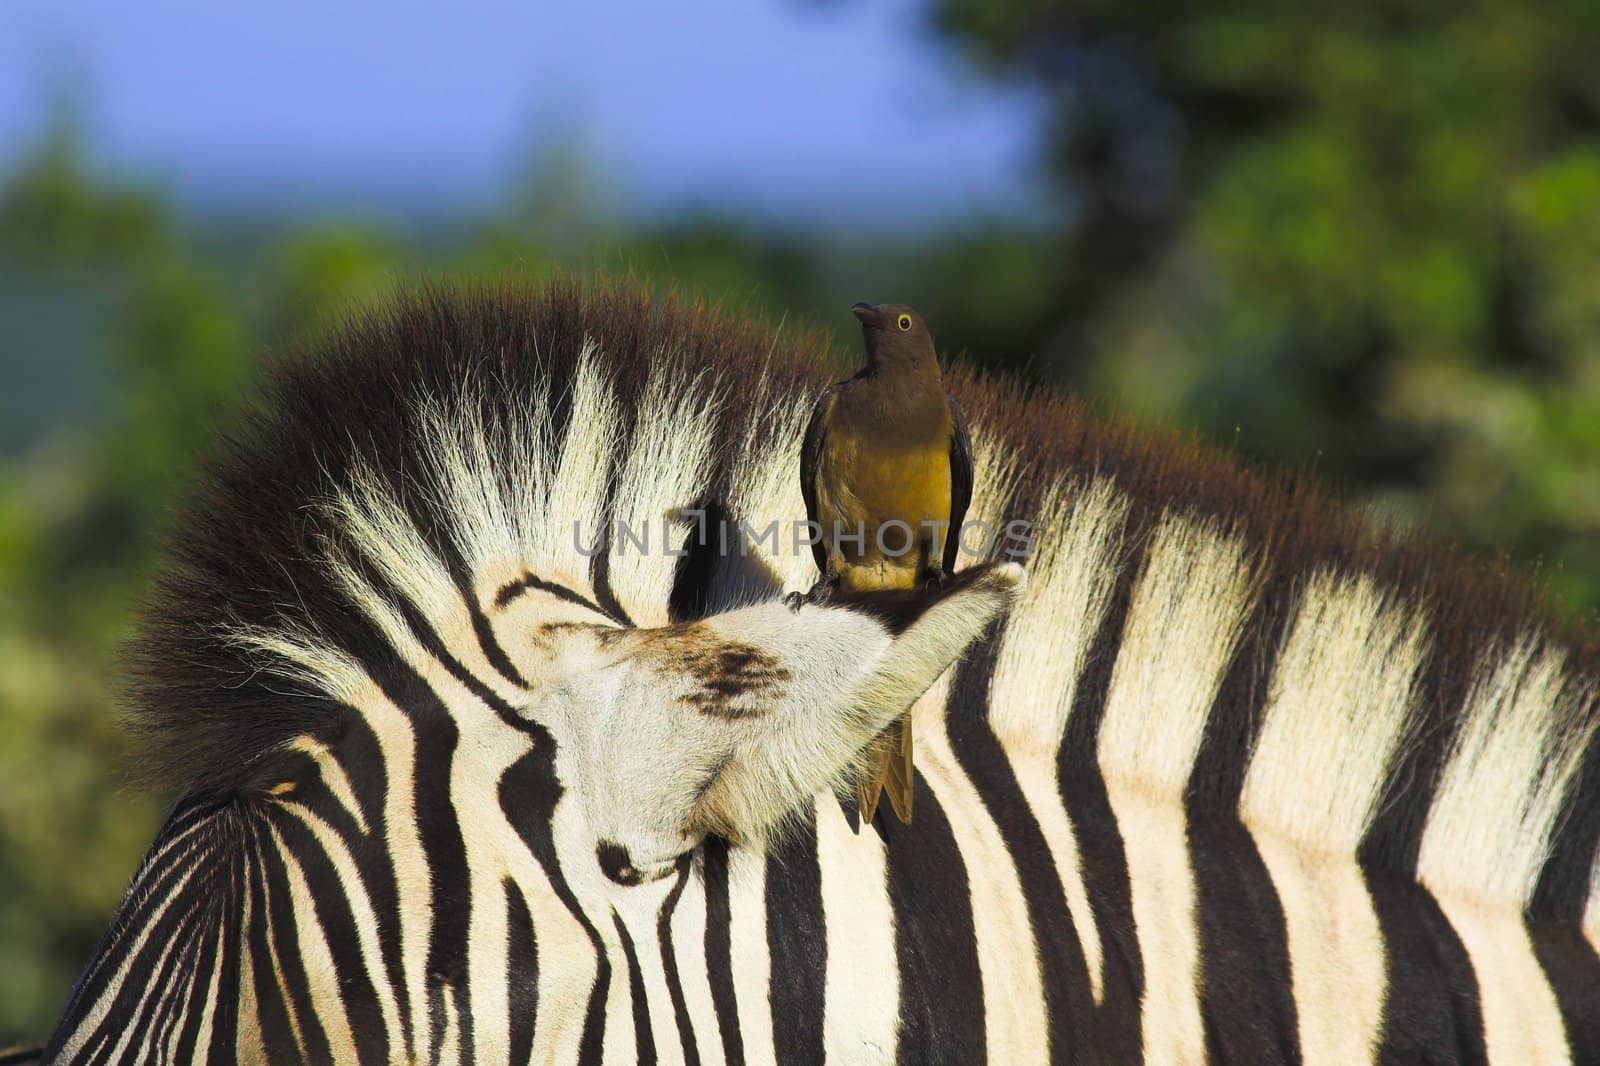 Juvenile red-billed oxpecker on the ear of a zebra